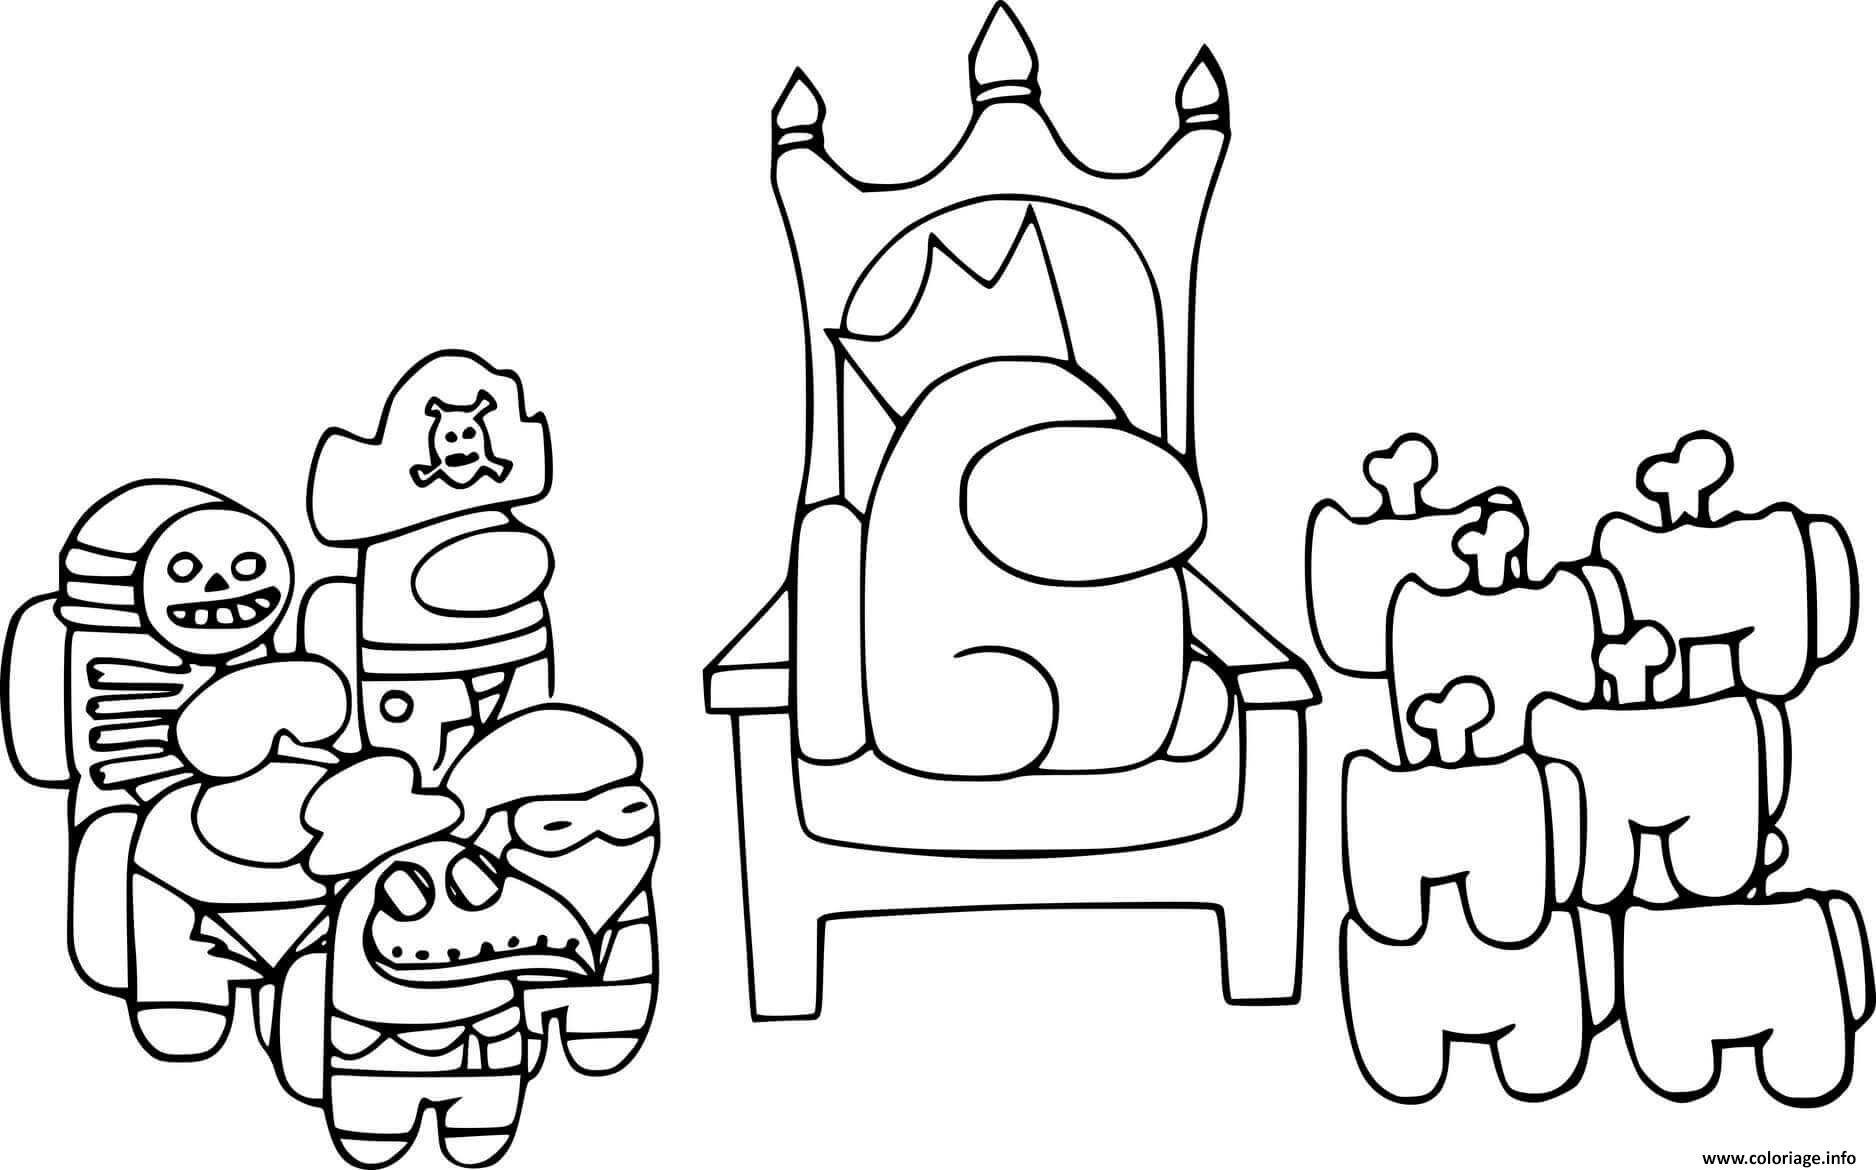 Coloriage Among Us King and Others - JeColorie.com